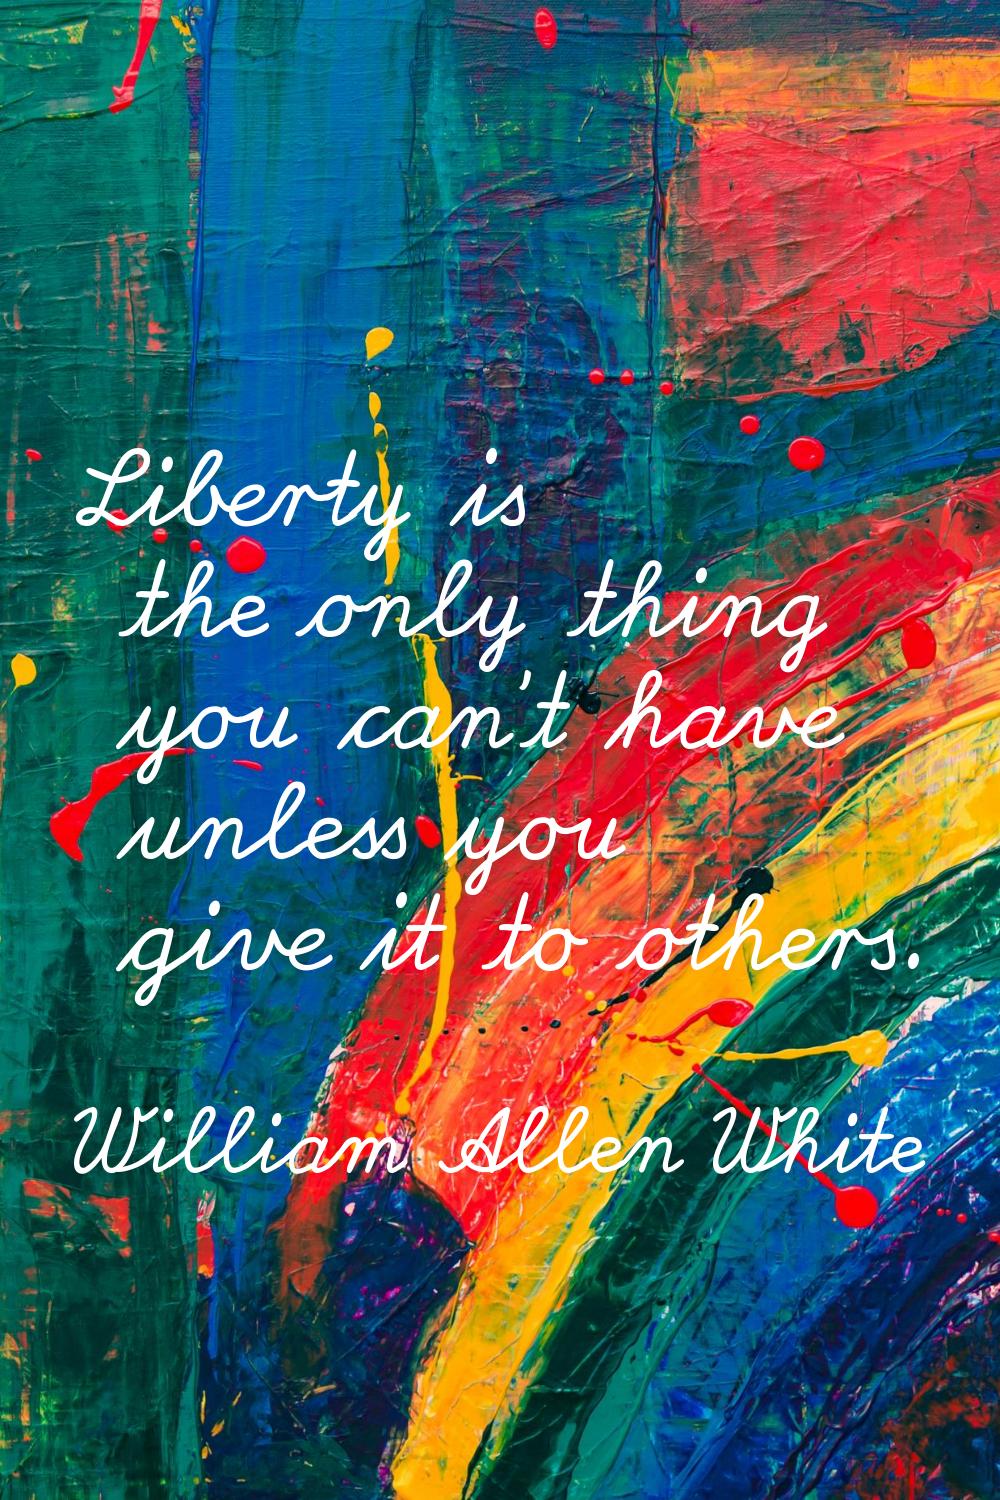 Liberty is the only thing you can't have unless you give it to others.